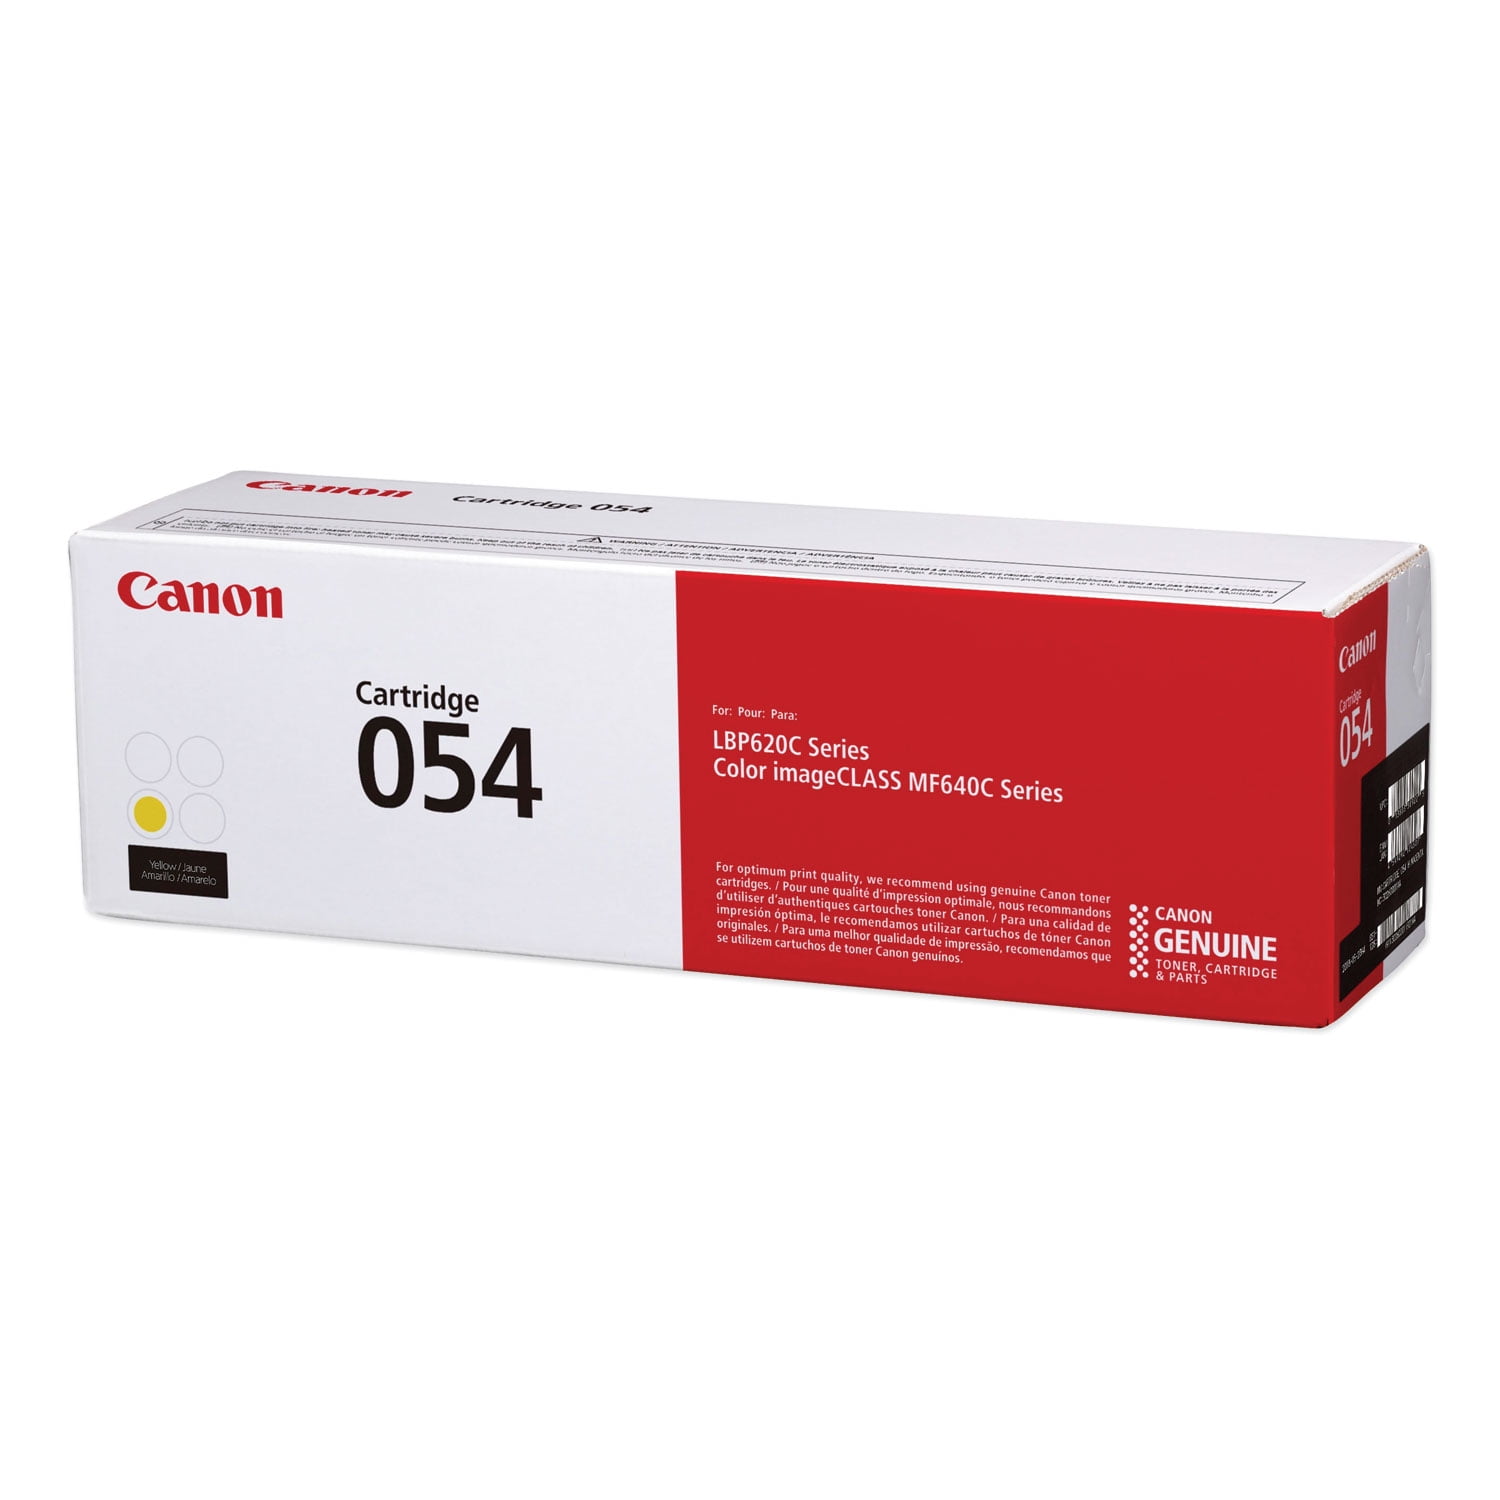 Genuine Canon Toner 054 Yellow, Standard - Yields Up To 1,200 Pages